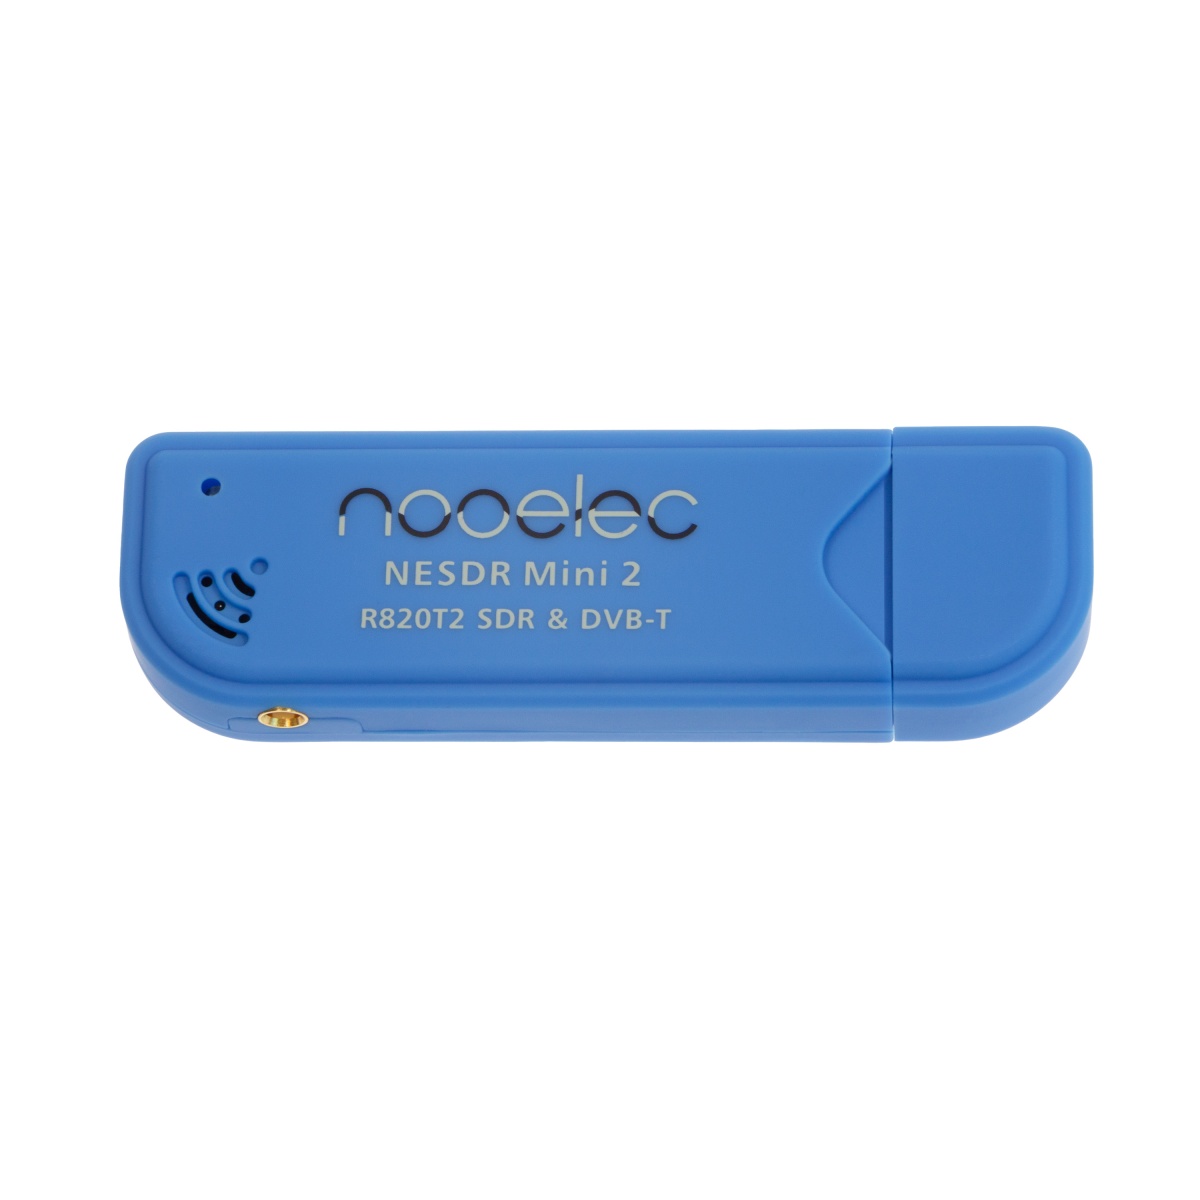 Nooelec NESDR Mini 2 USB RTL-SDR and ADS-B Receiver Set, RTL2832U and  R820T2 Tuner, w/ Antenna. MCX Input. Low-Cost Software Defined Radio  Compatible